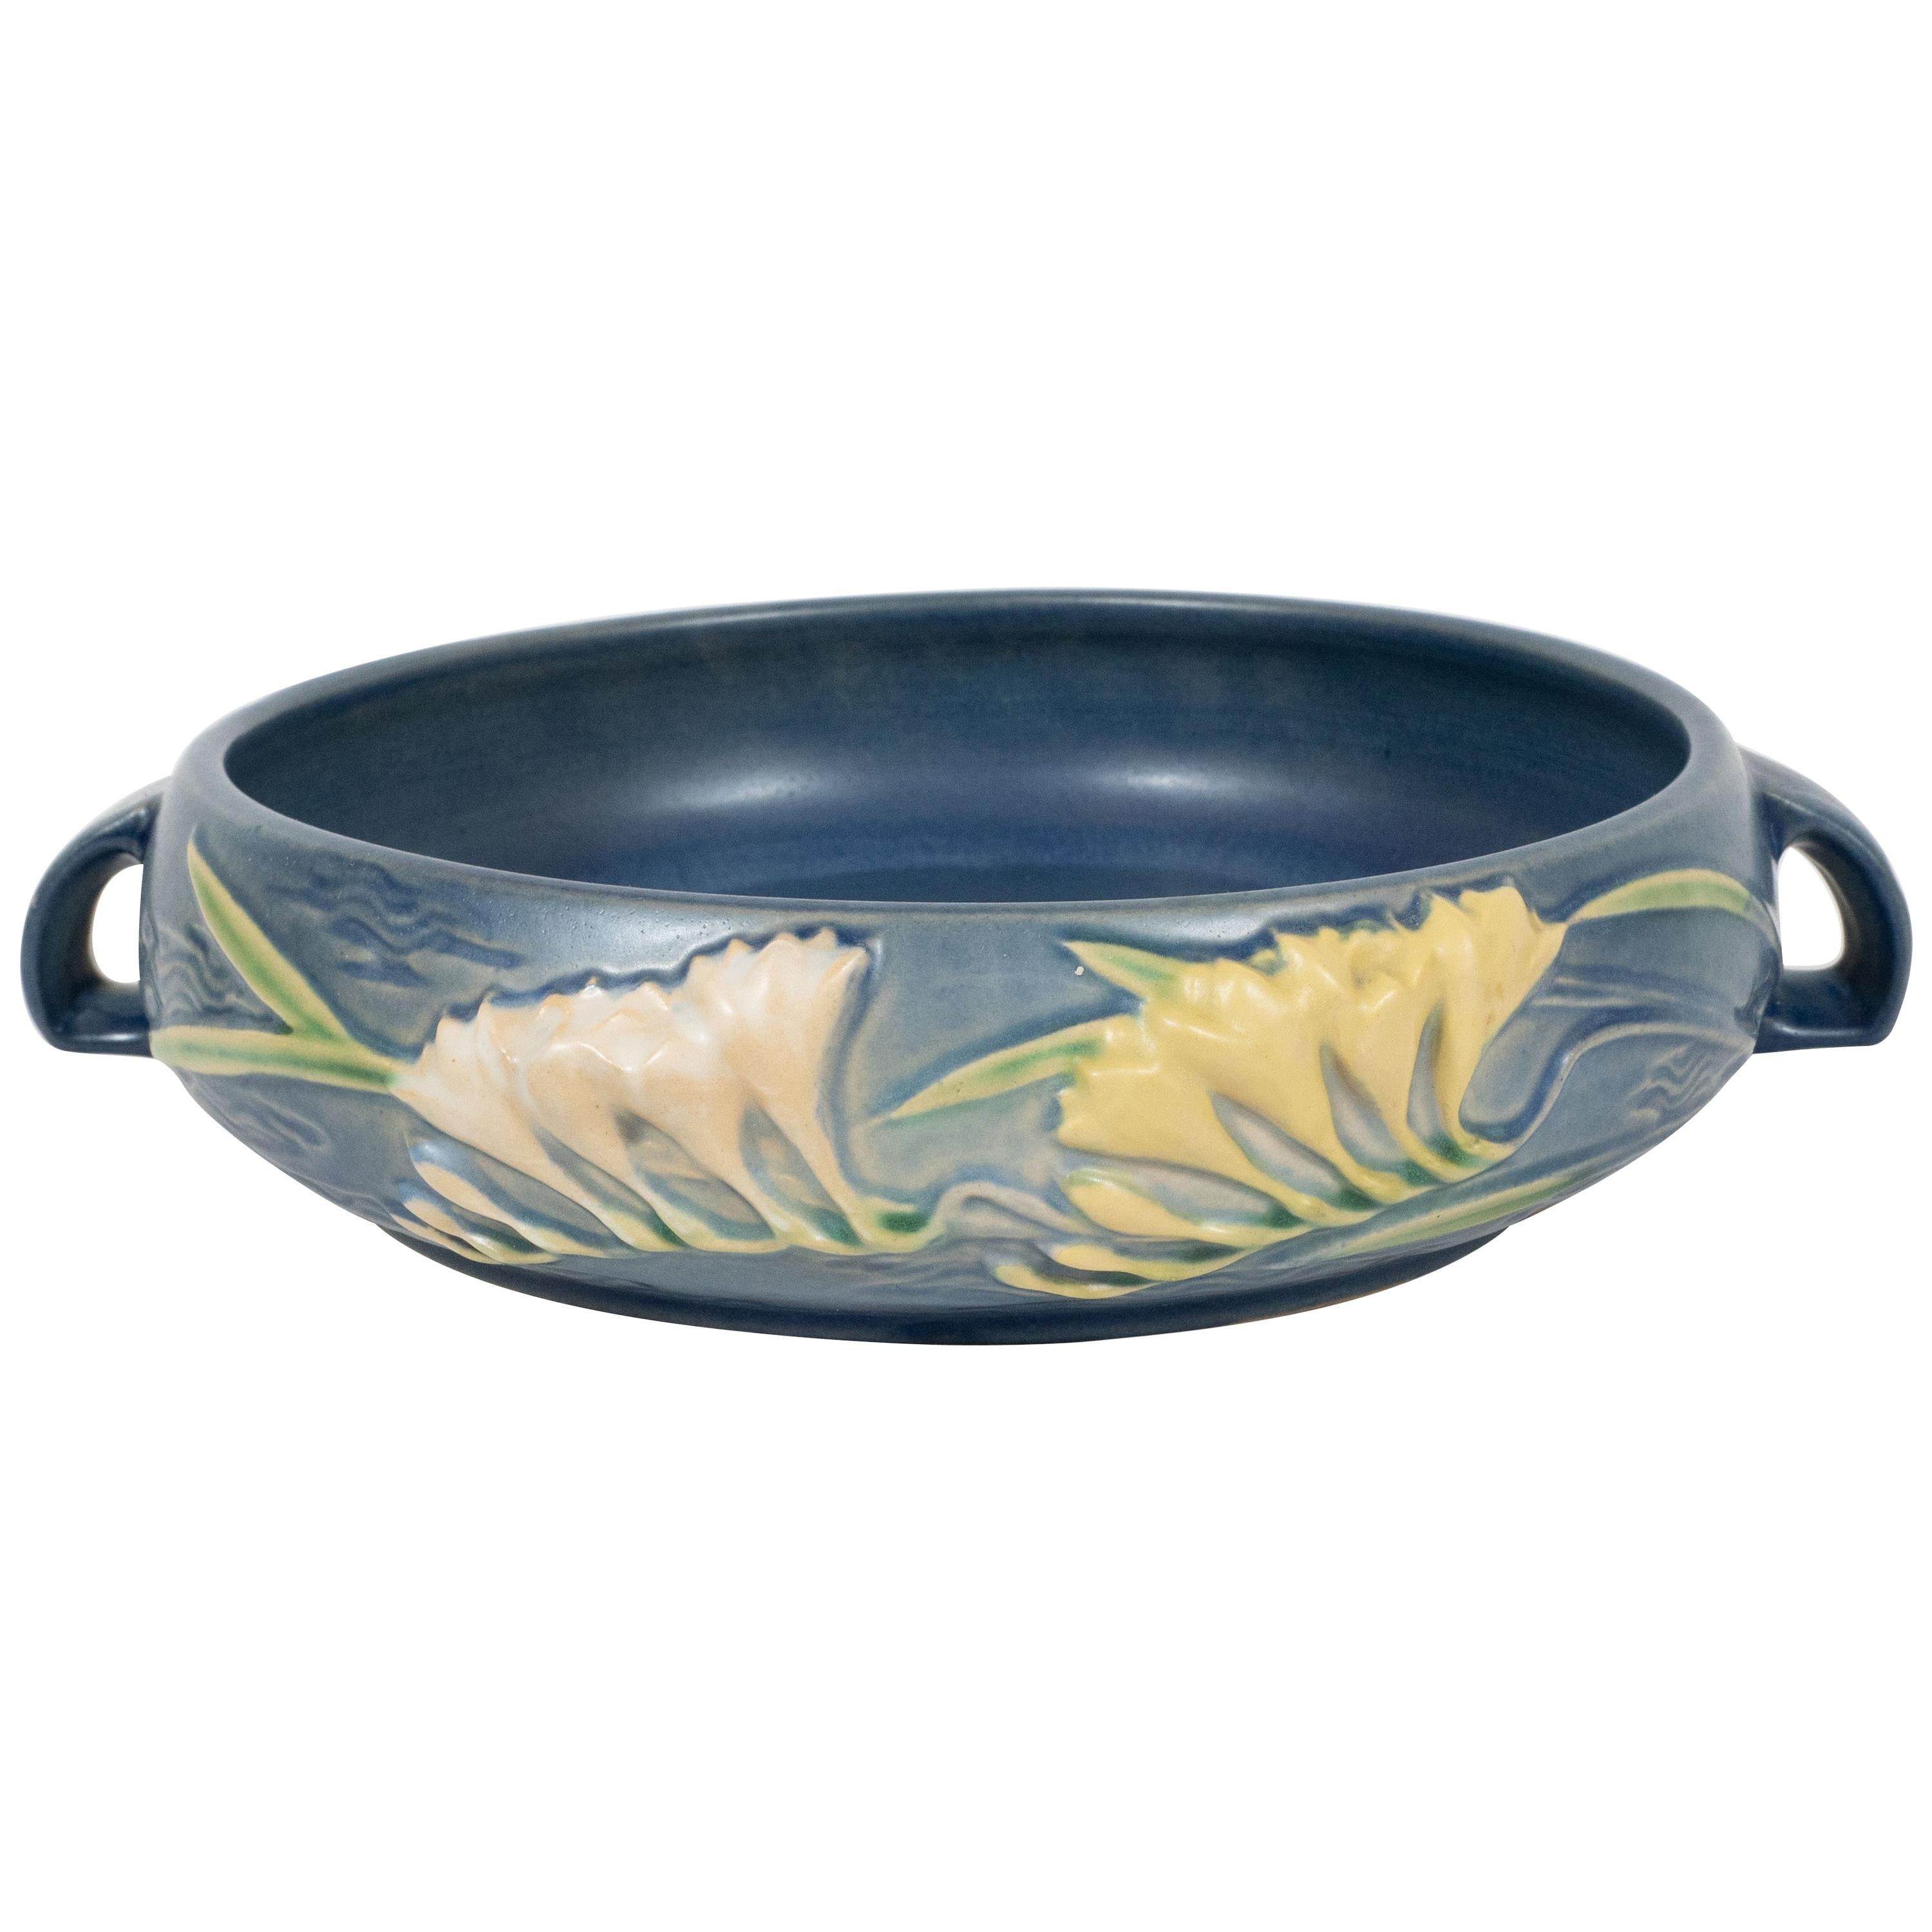 Art Deco Indigo Decorative Bowl with Lily of the Valleys Motif by Roseville